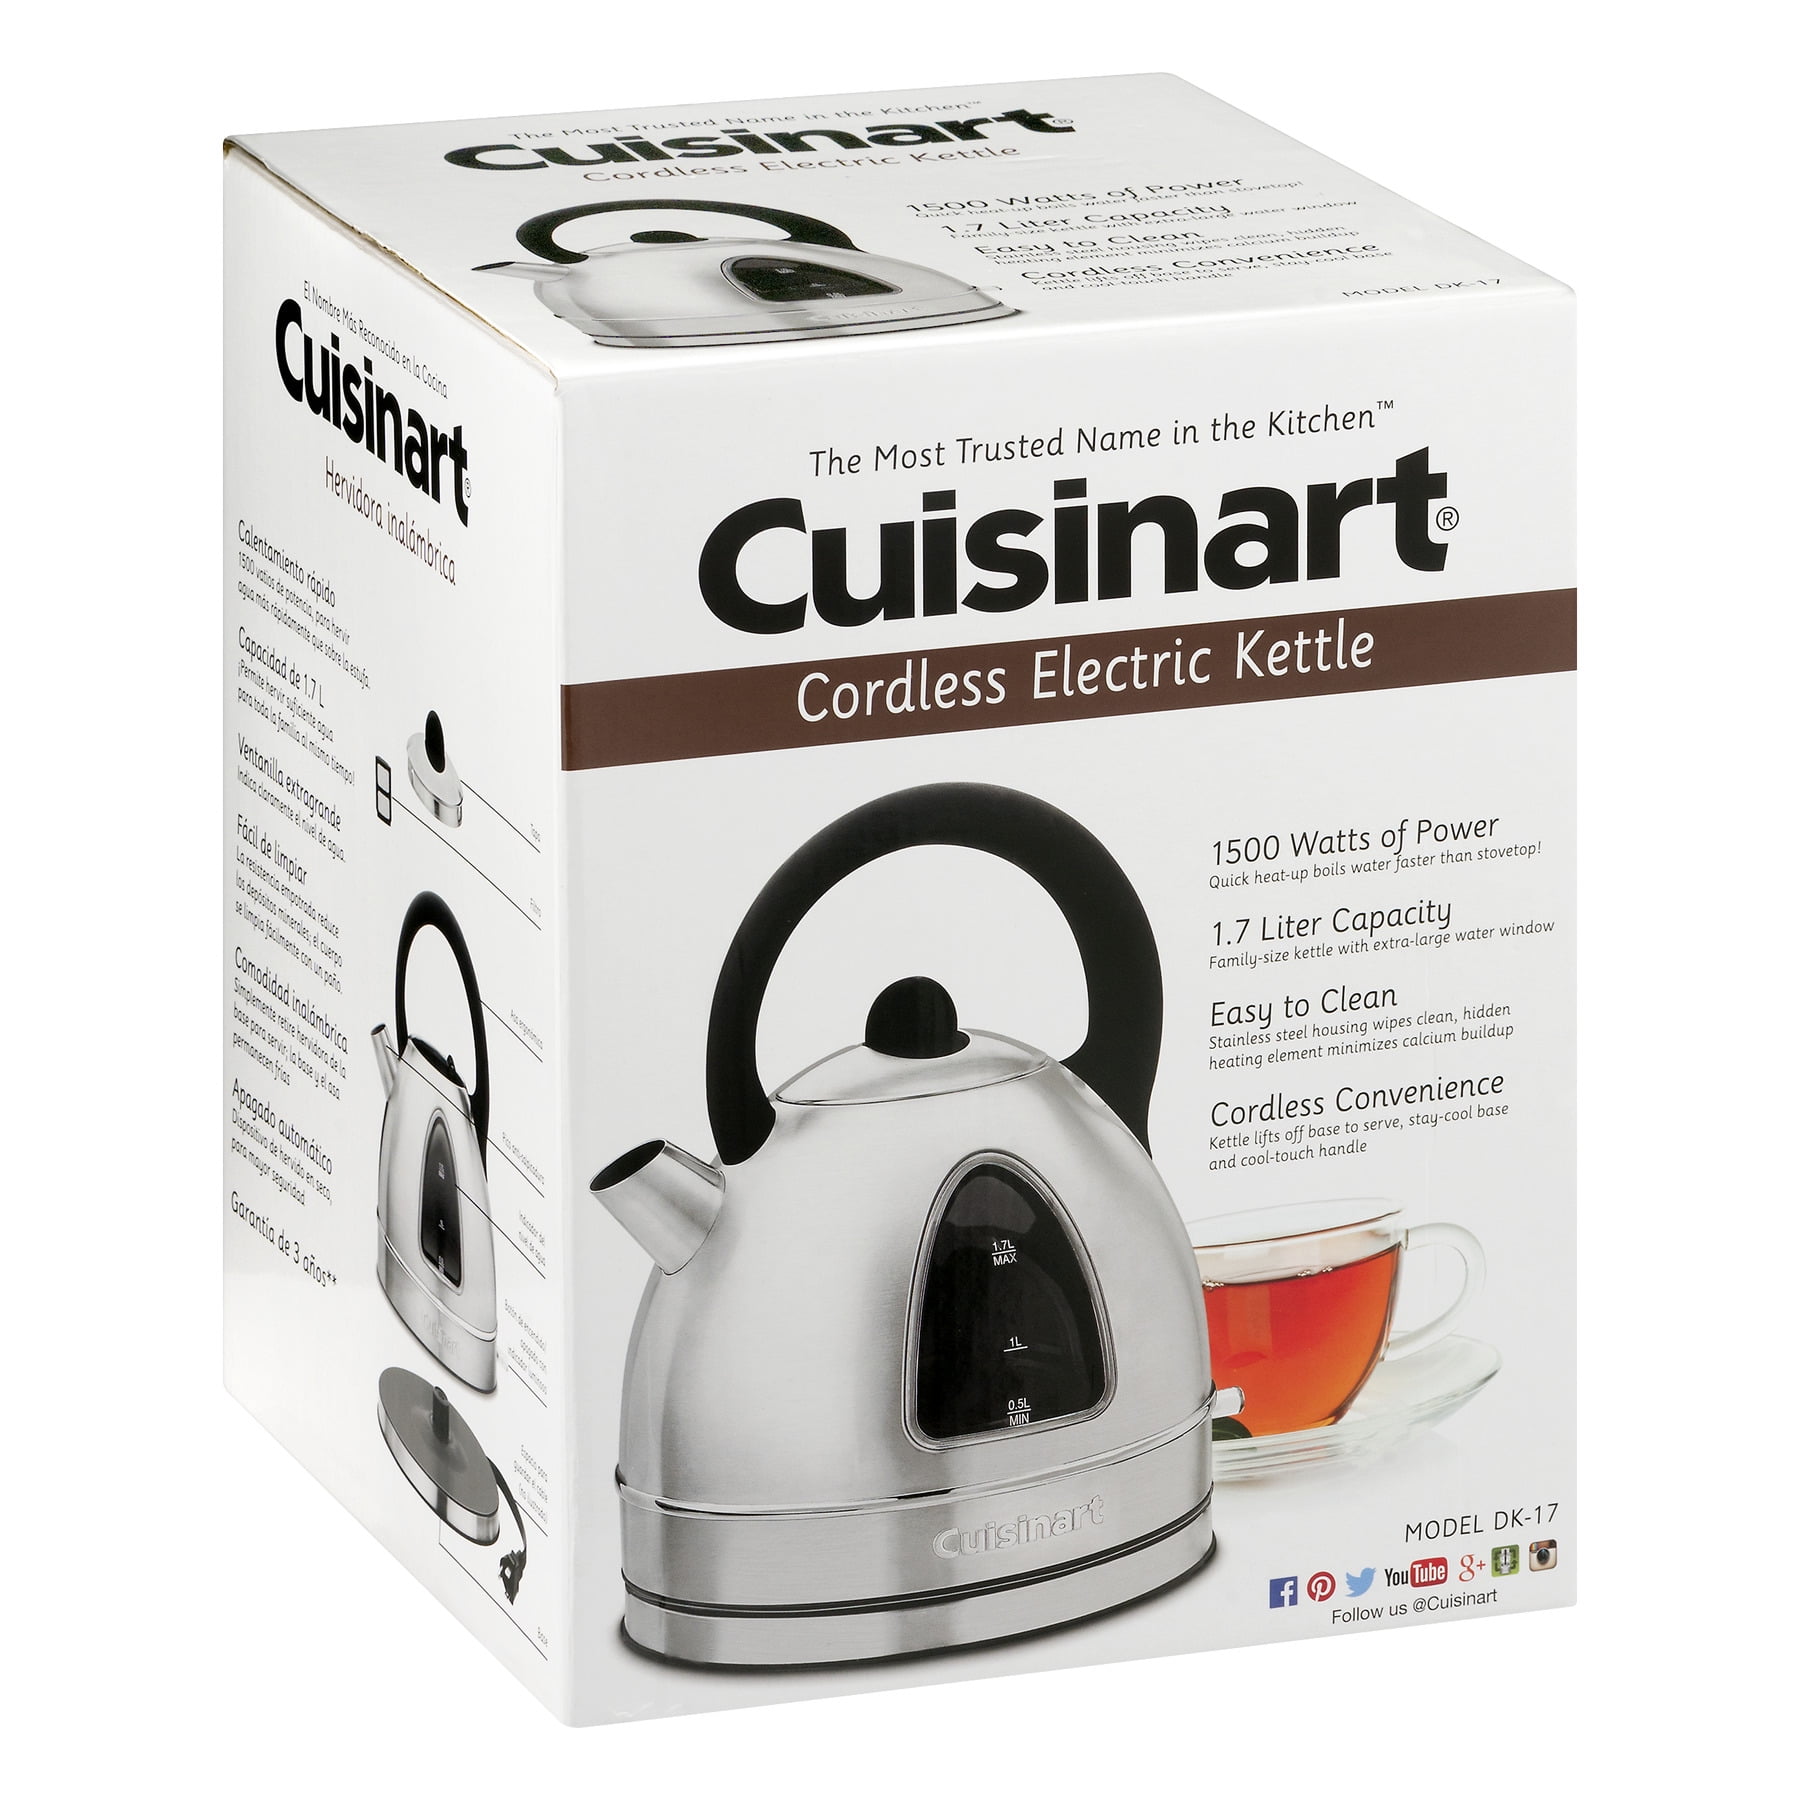 Reviewing the Cuisinart Electric Kettle: A 1.7-Liter Powerhouse, by  Sumbulrawjani